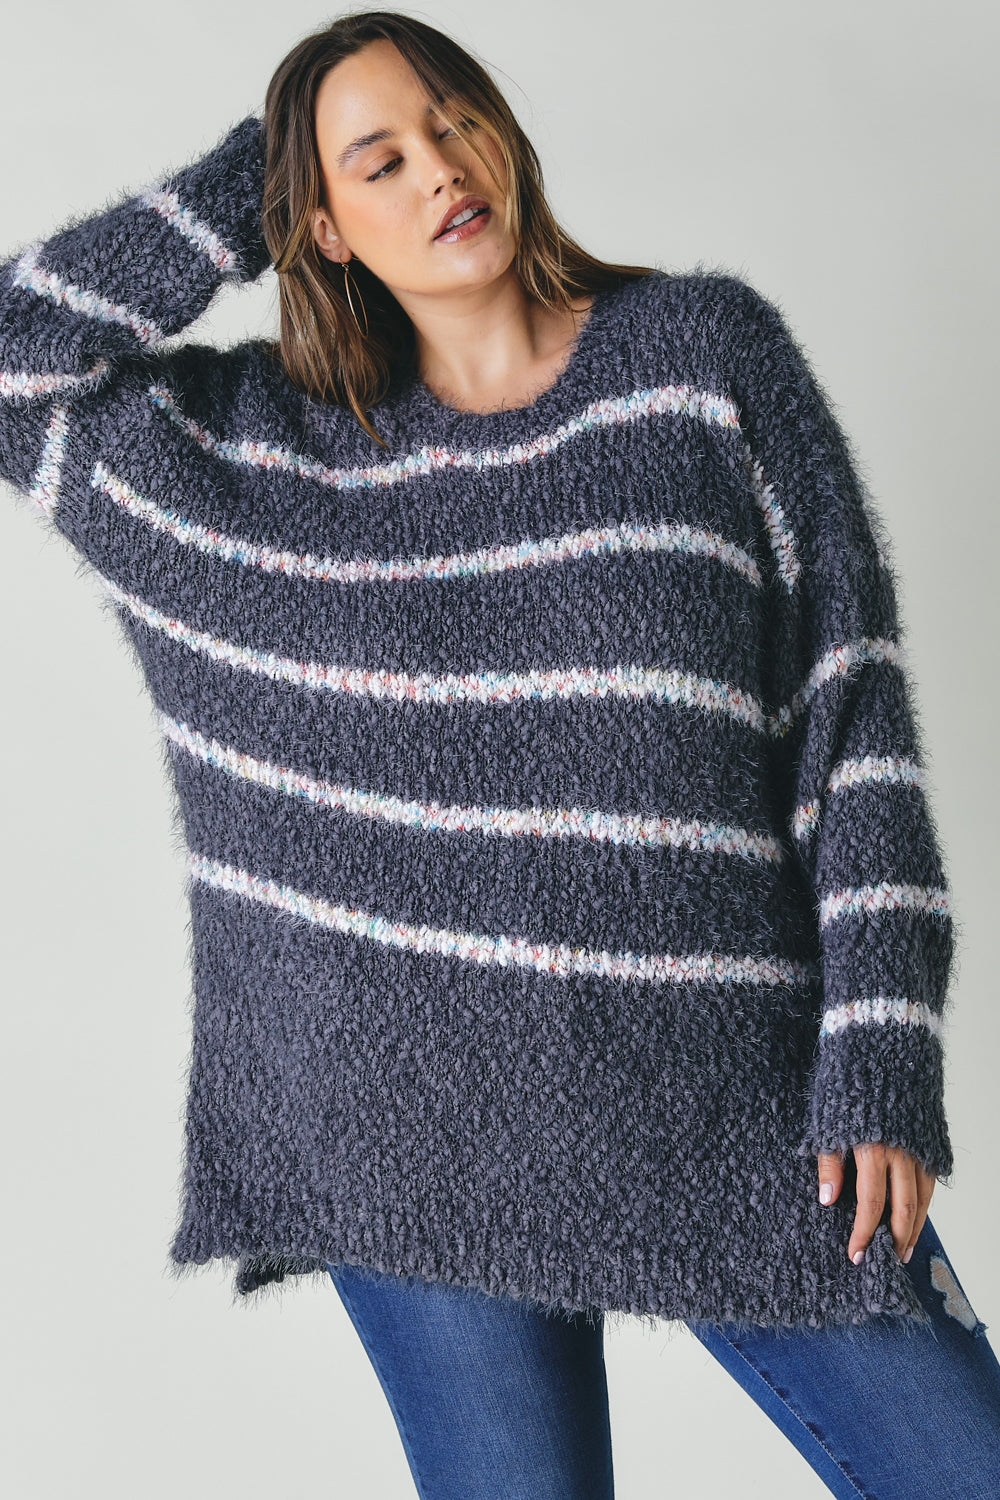 Plus Size Sweater With Stripe Detail  | KIKI COUTURE-Women's Clothing, Designer Fashions, Shoes, Bags